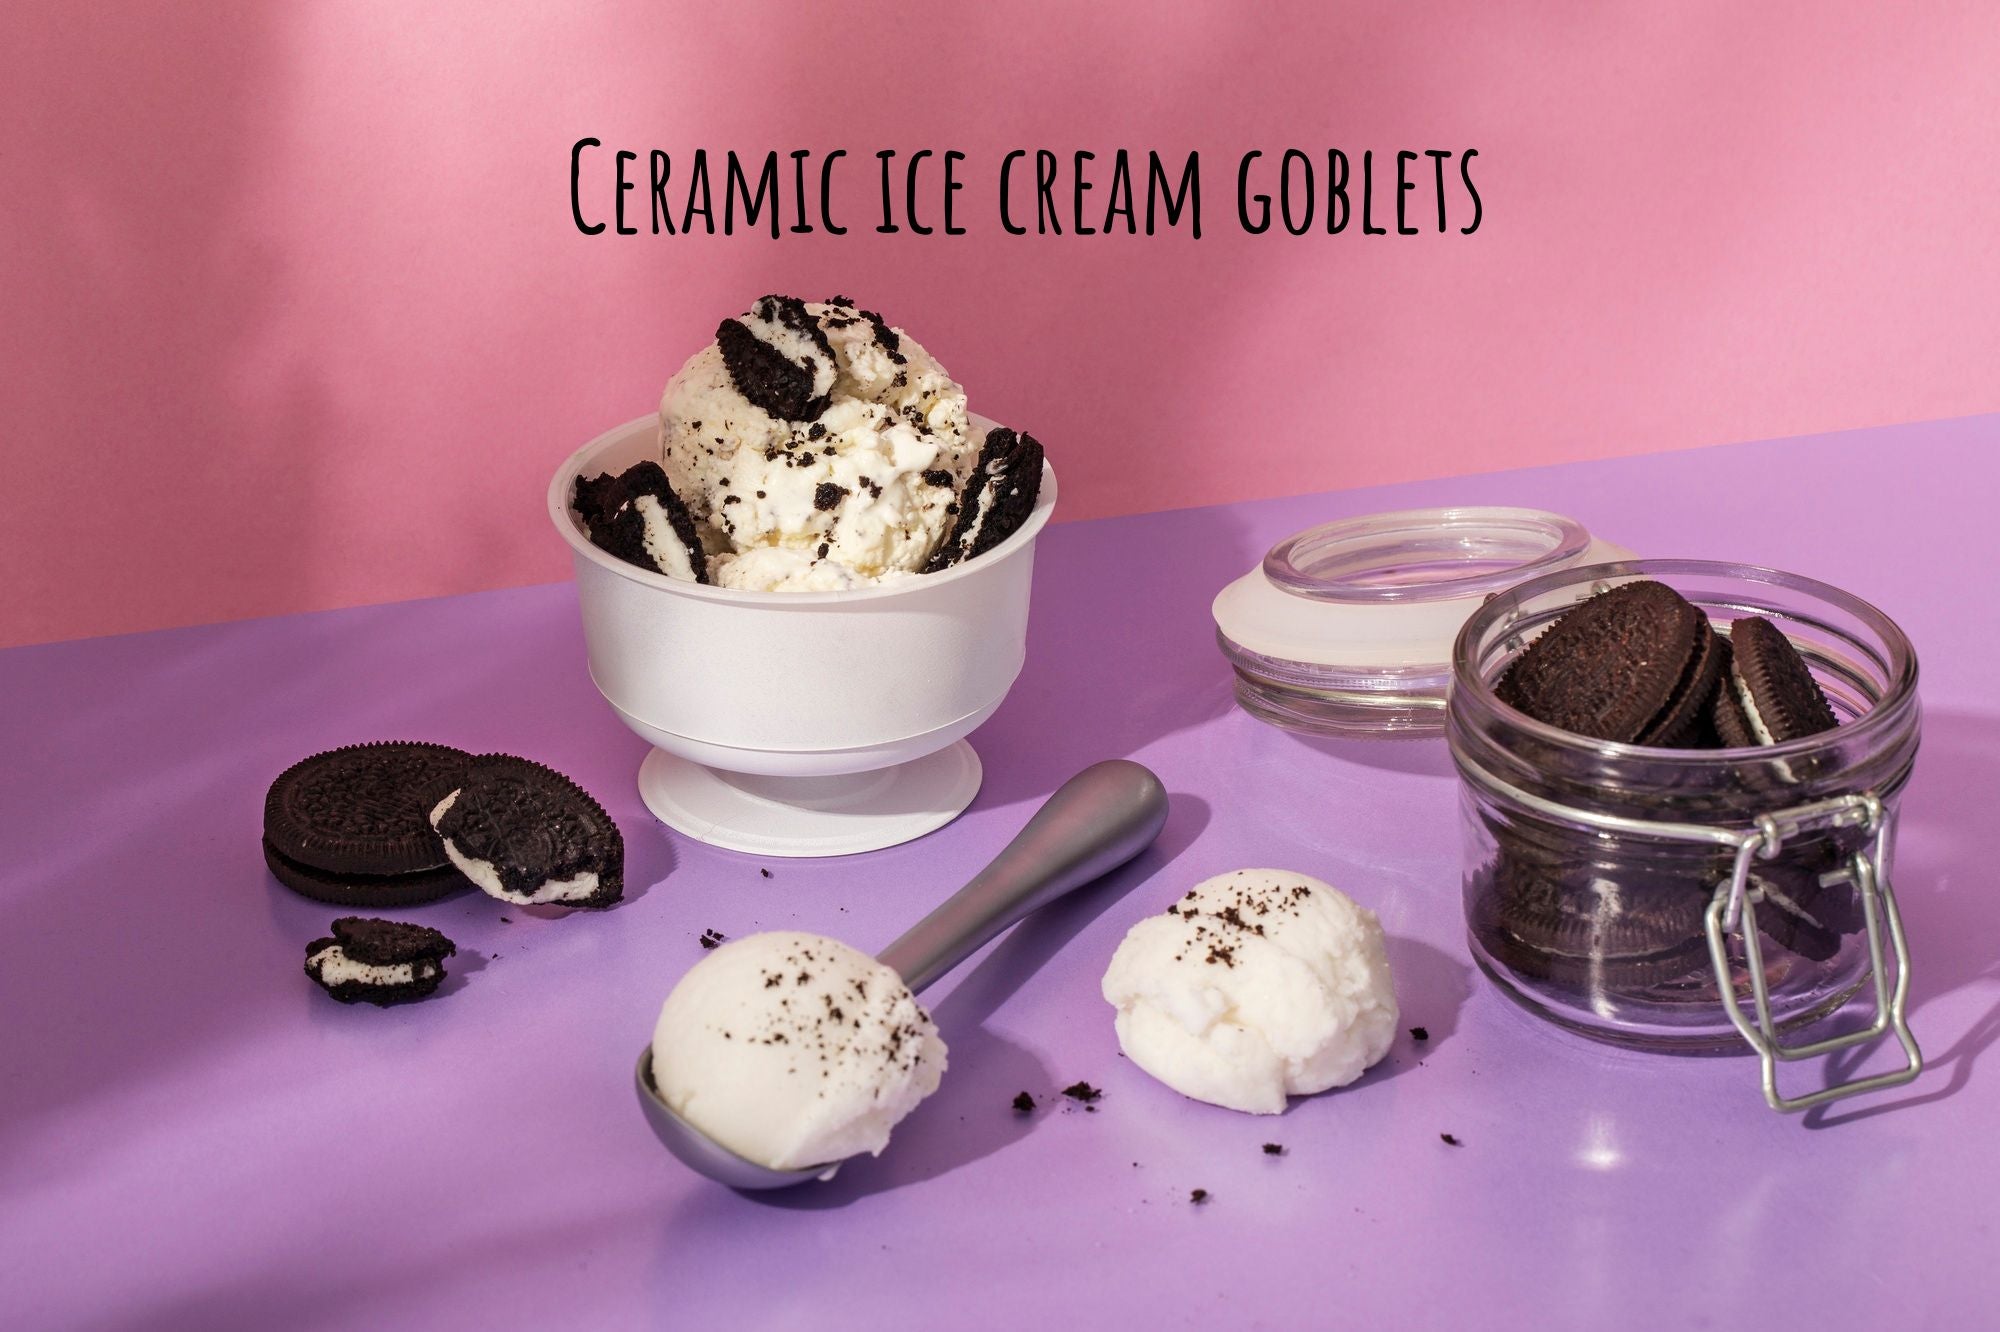 Stunning Ceramic Ice Cream Goblets to Elevate Your Dessert Experience